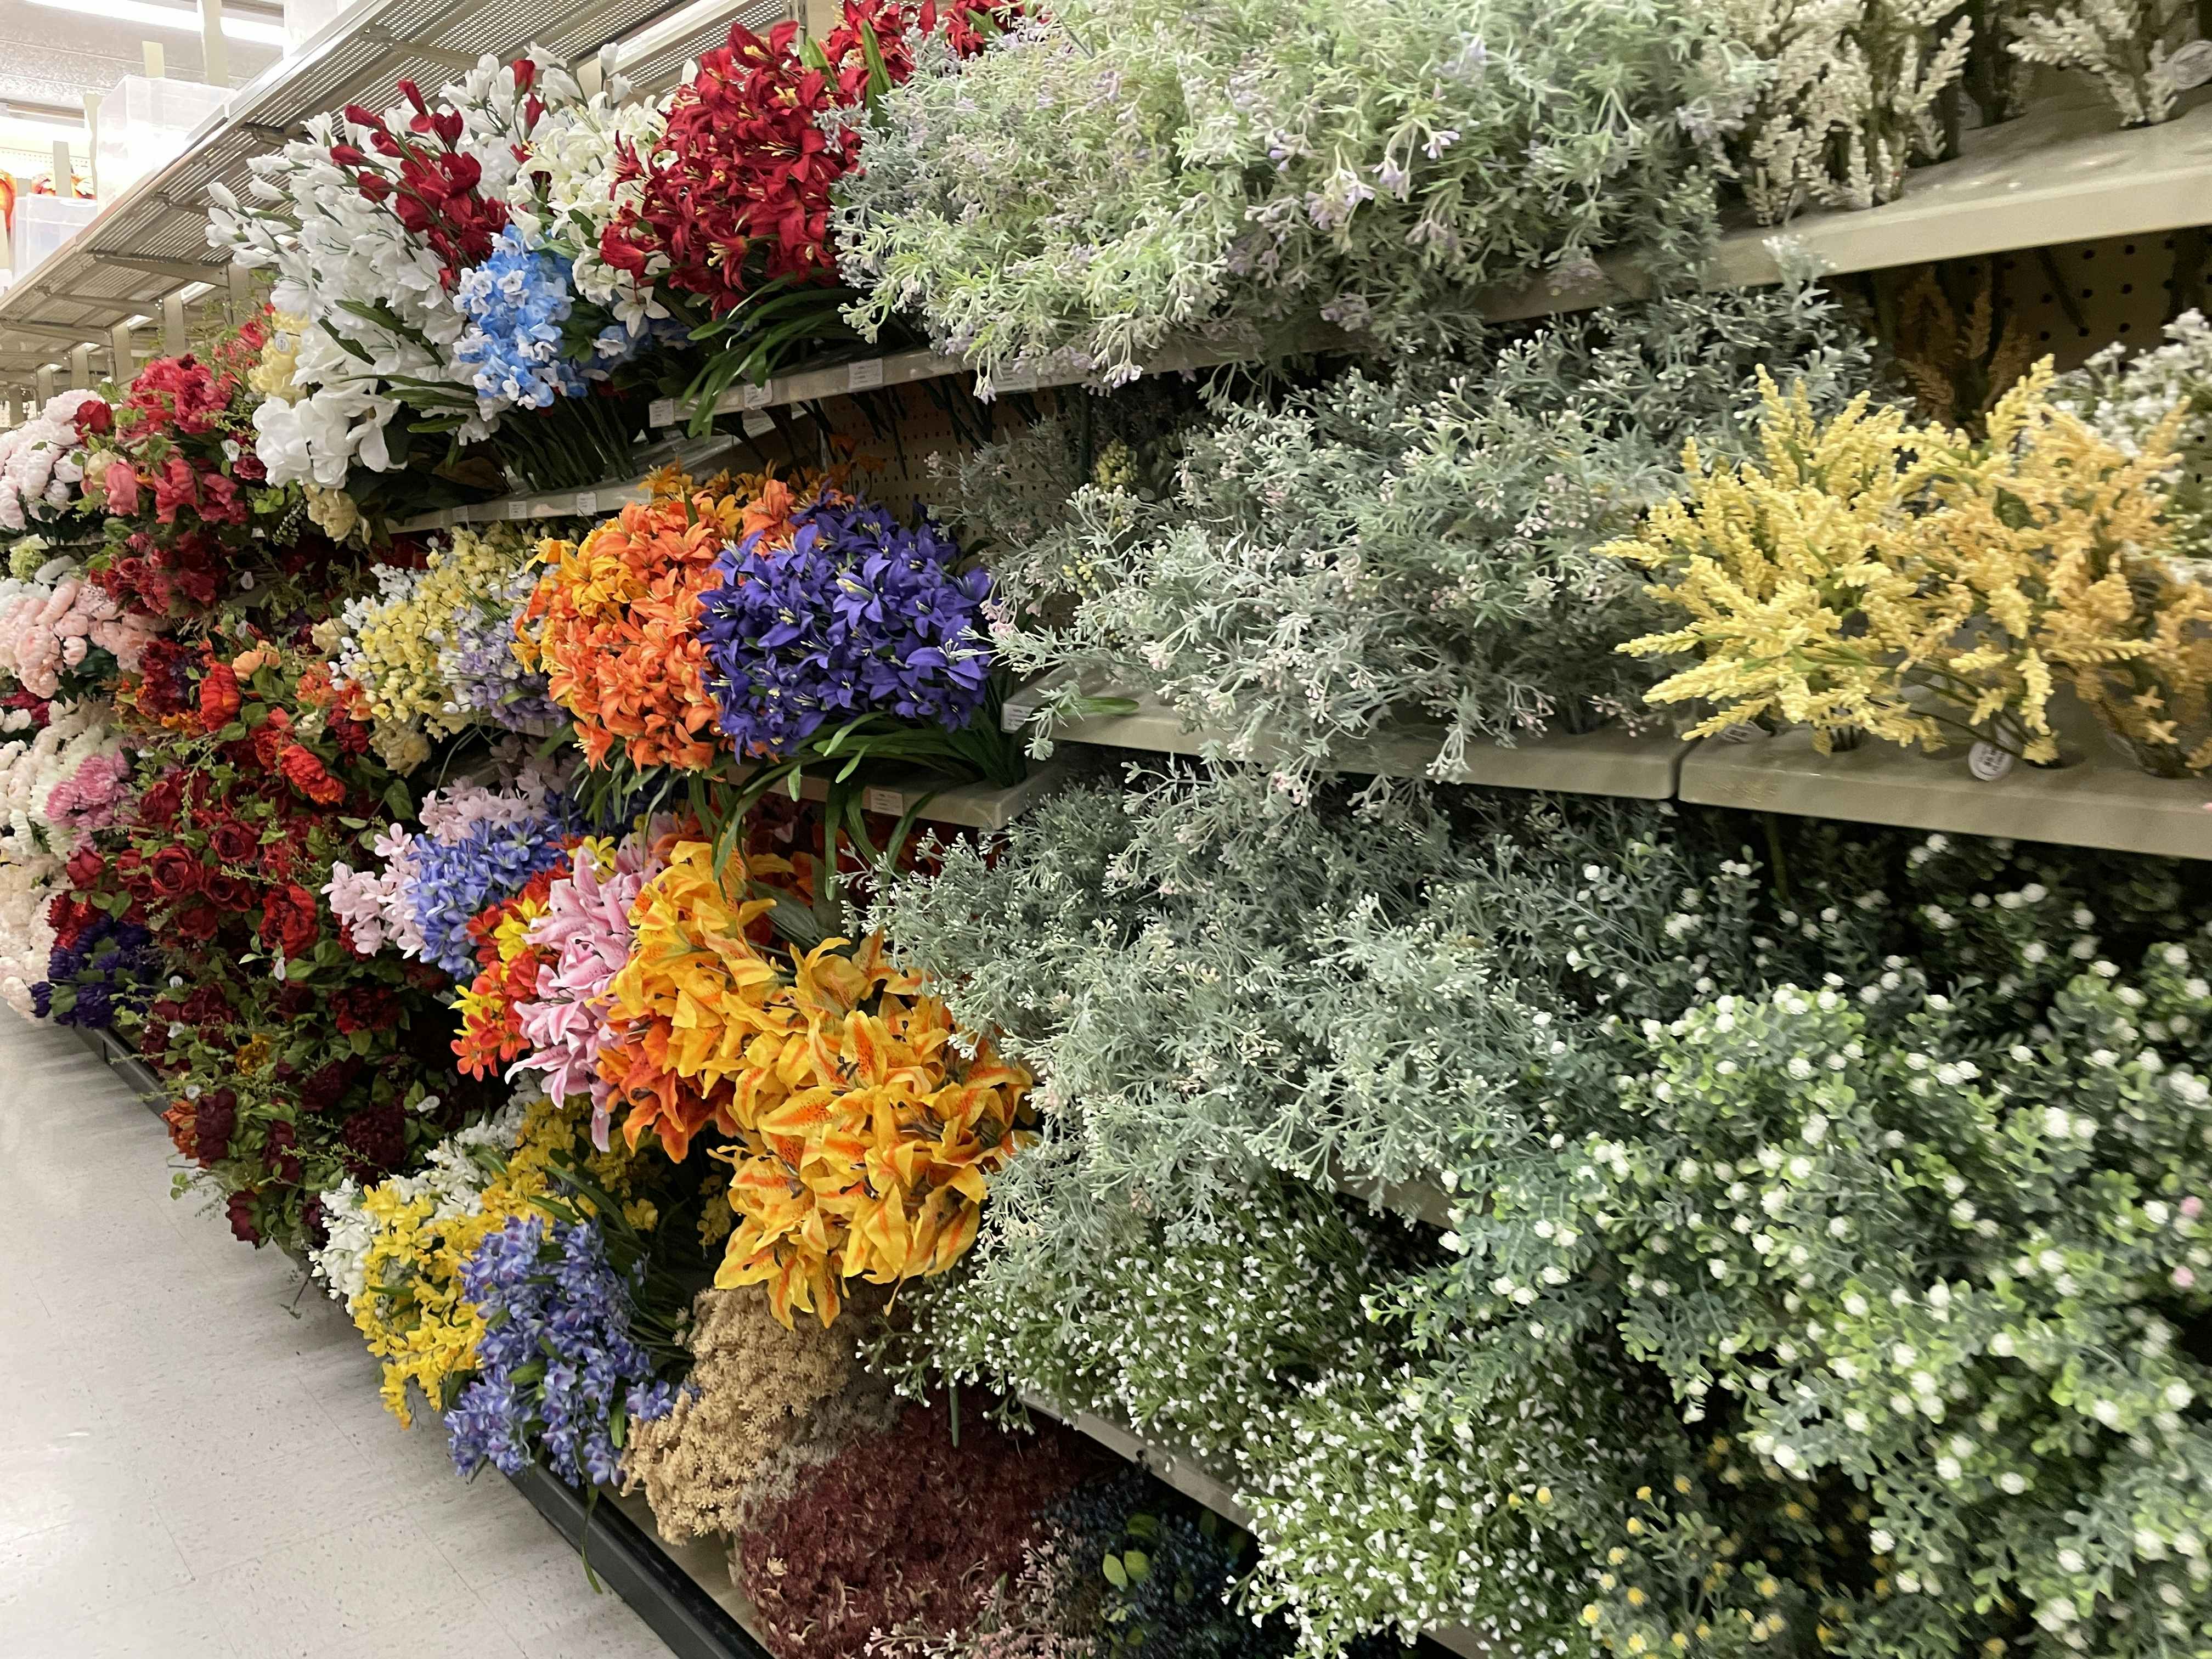 Hobby Lobby Florals 2023 Dreamstime 1676842555 1676842555 ?auto=format&fit=fill&q=25